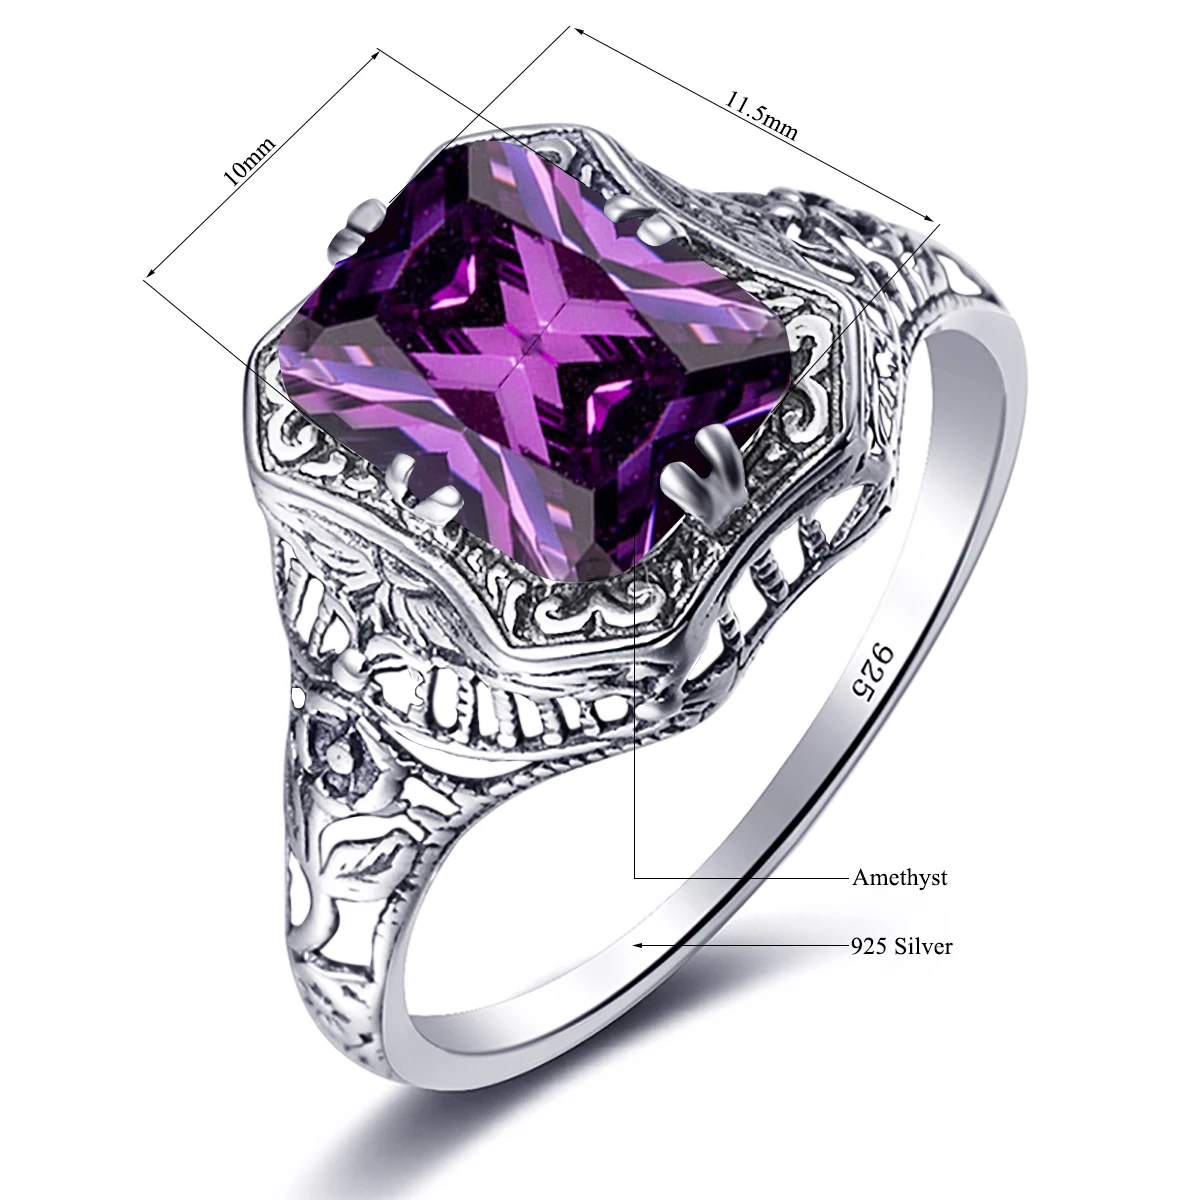 Szjinao High Quality Vintage Amethyst Ring Silver 925 100% Signet Pattern  Fine Jewelry For Women Wedding Party Anniversary Gift